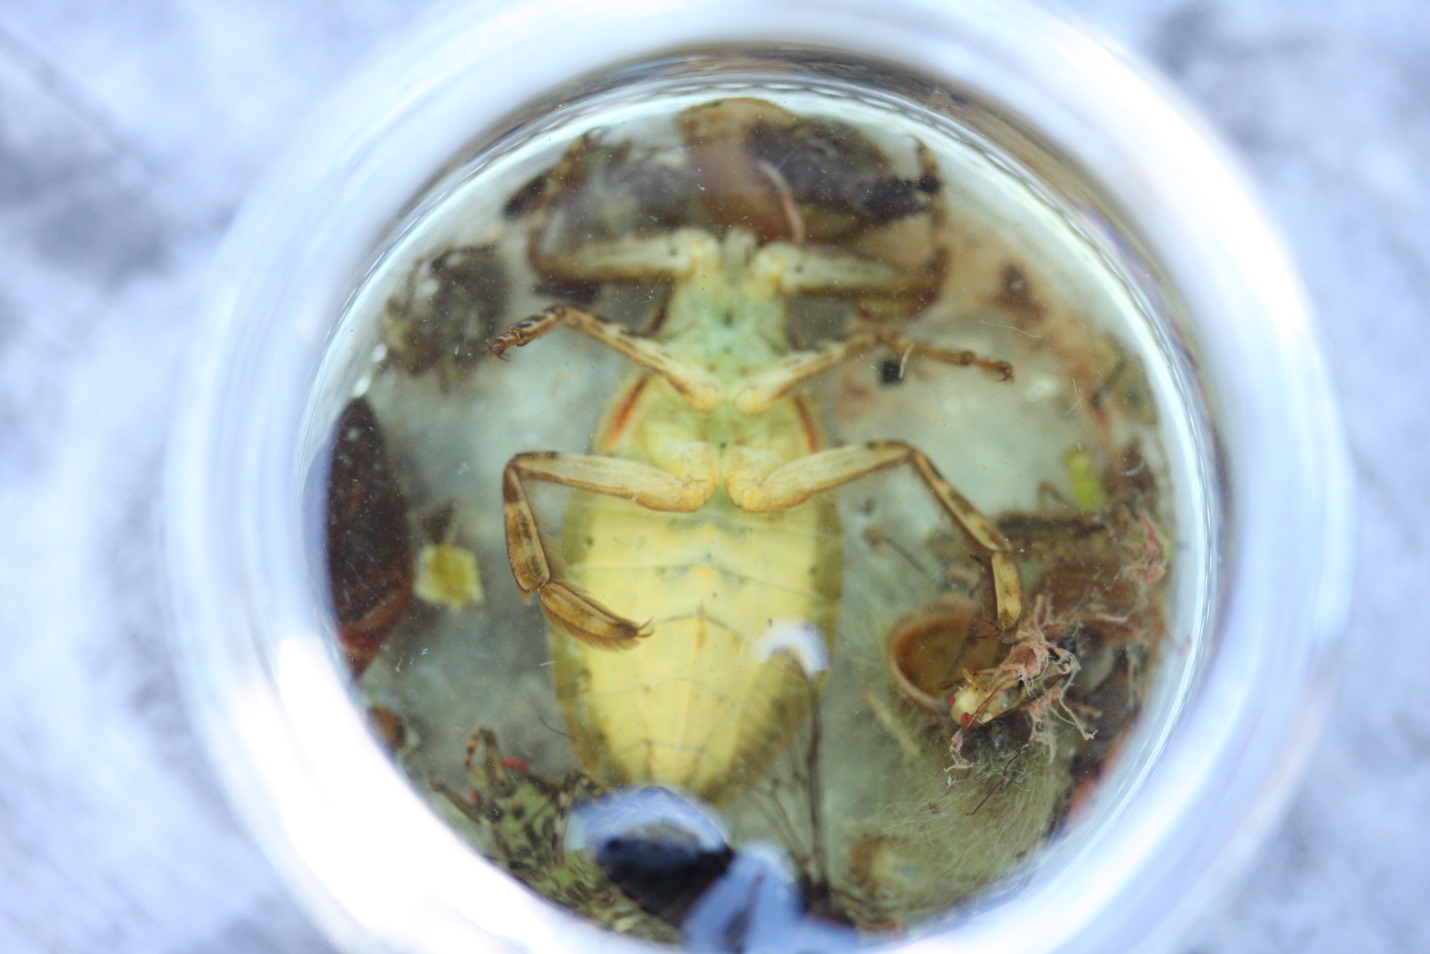 Here’s a photo of one of the belostomatids caught during our sampling. As you can see it’s not quite as big as the giant water bug from Madagascar, but it still dwarfs the fly in the lower right corner!